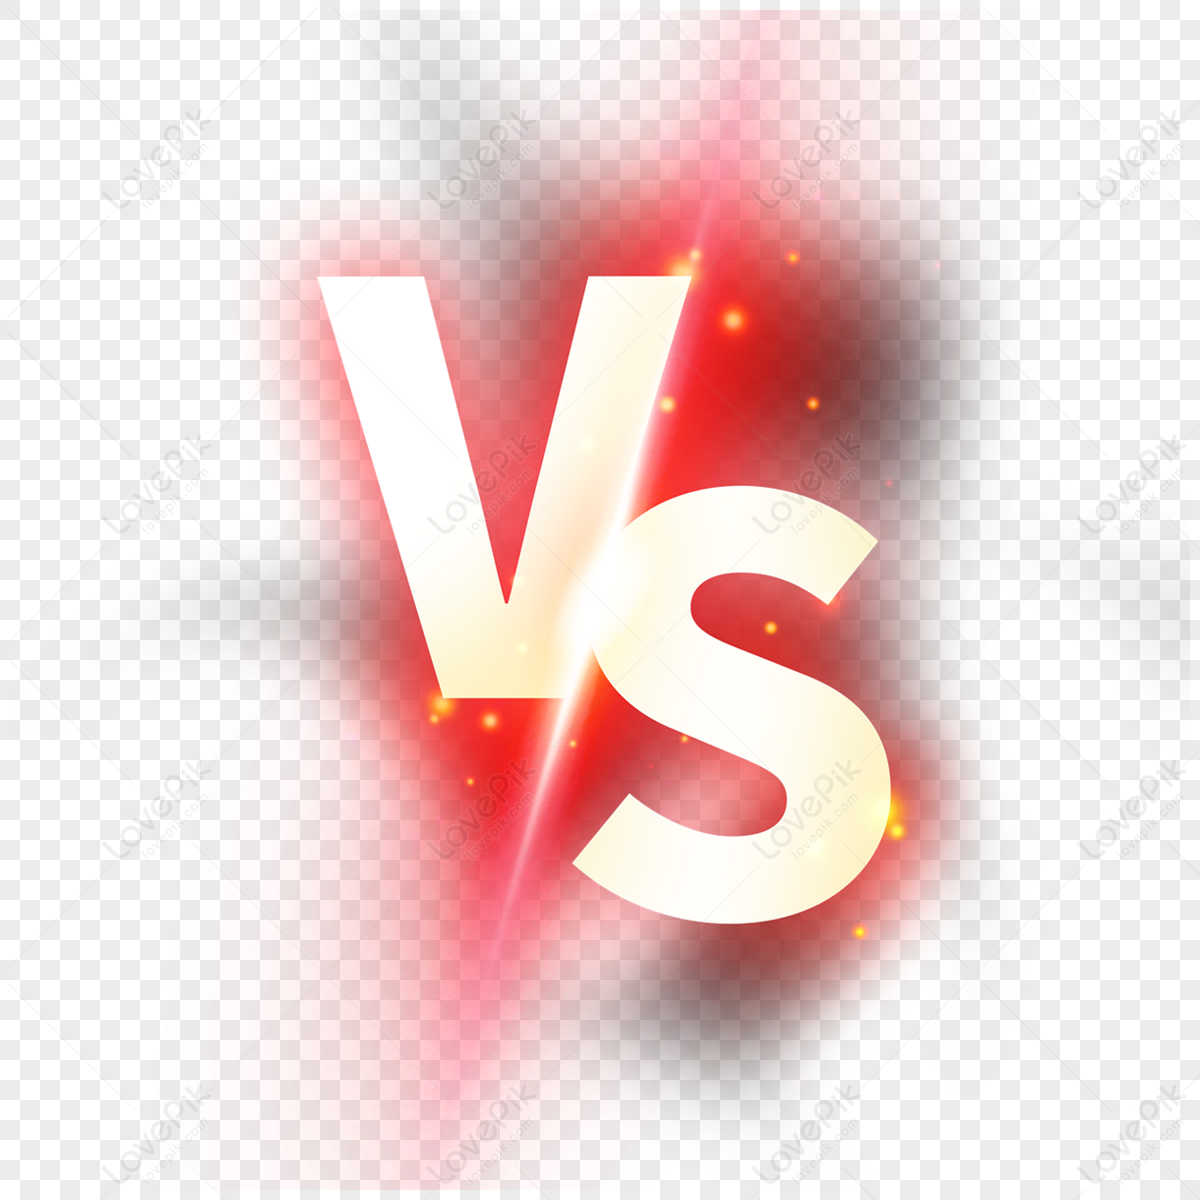 VS Versus Letters Vector Icon Stock Vector - Illustration of competitive,  element: 119955939